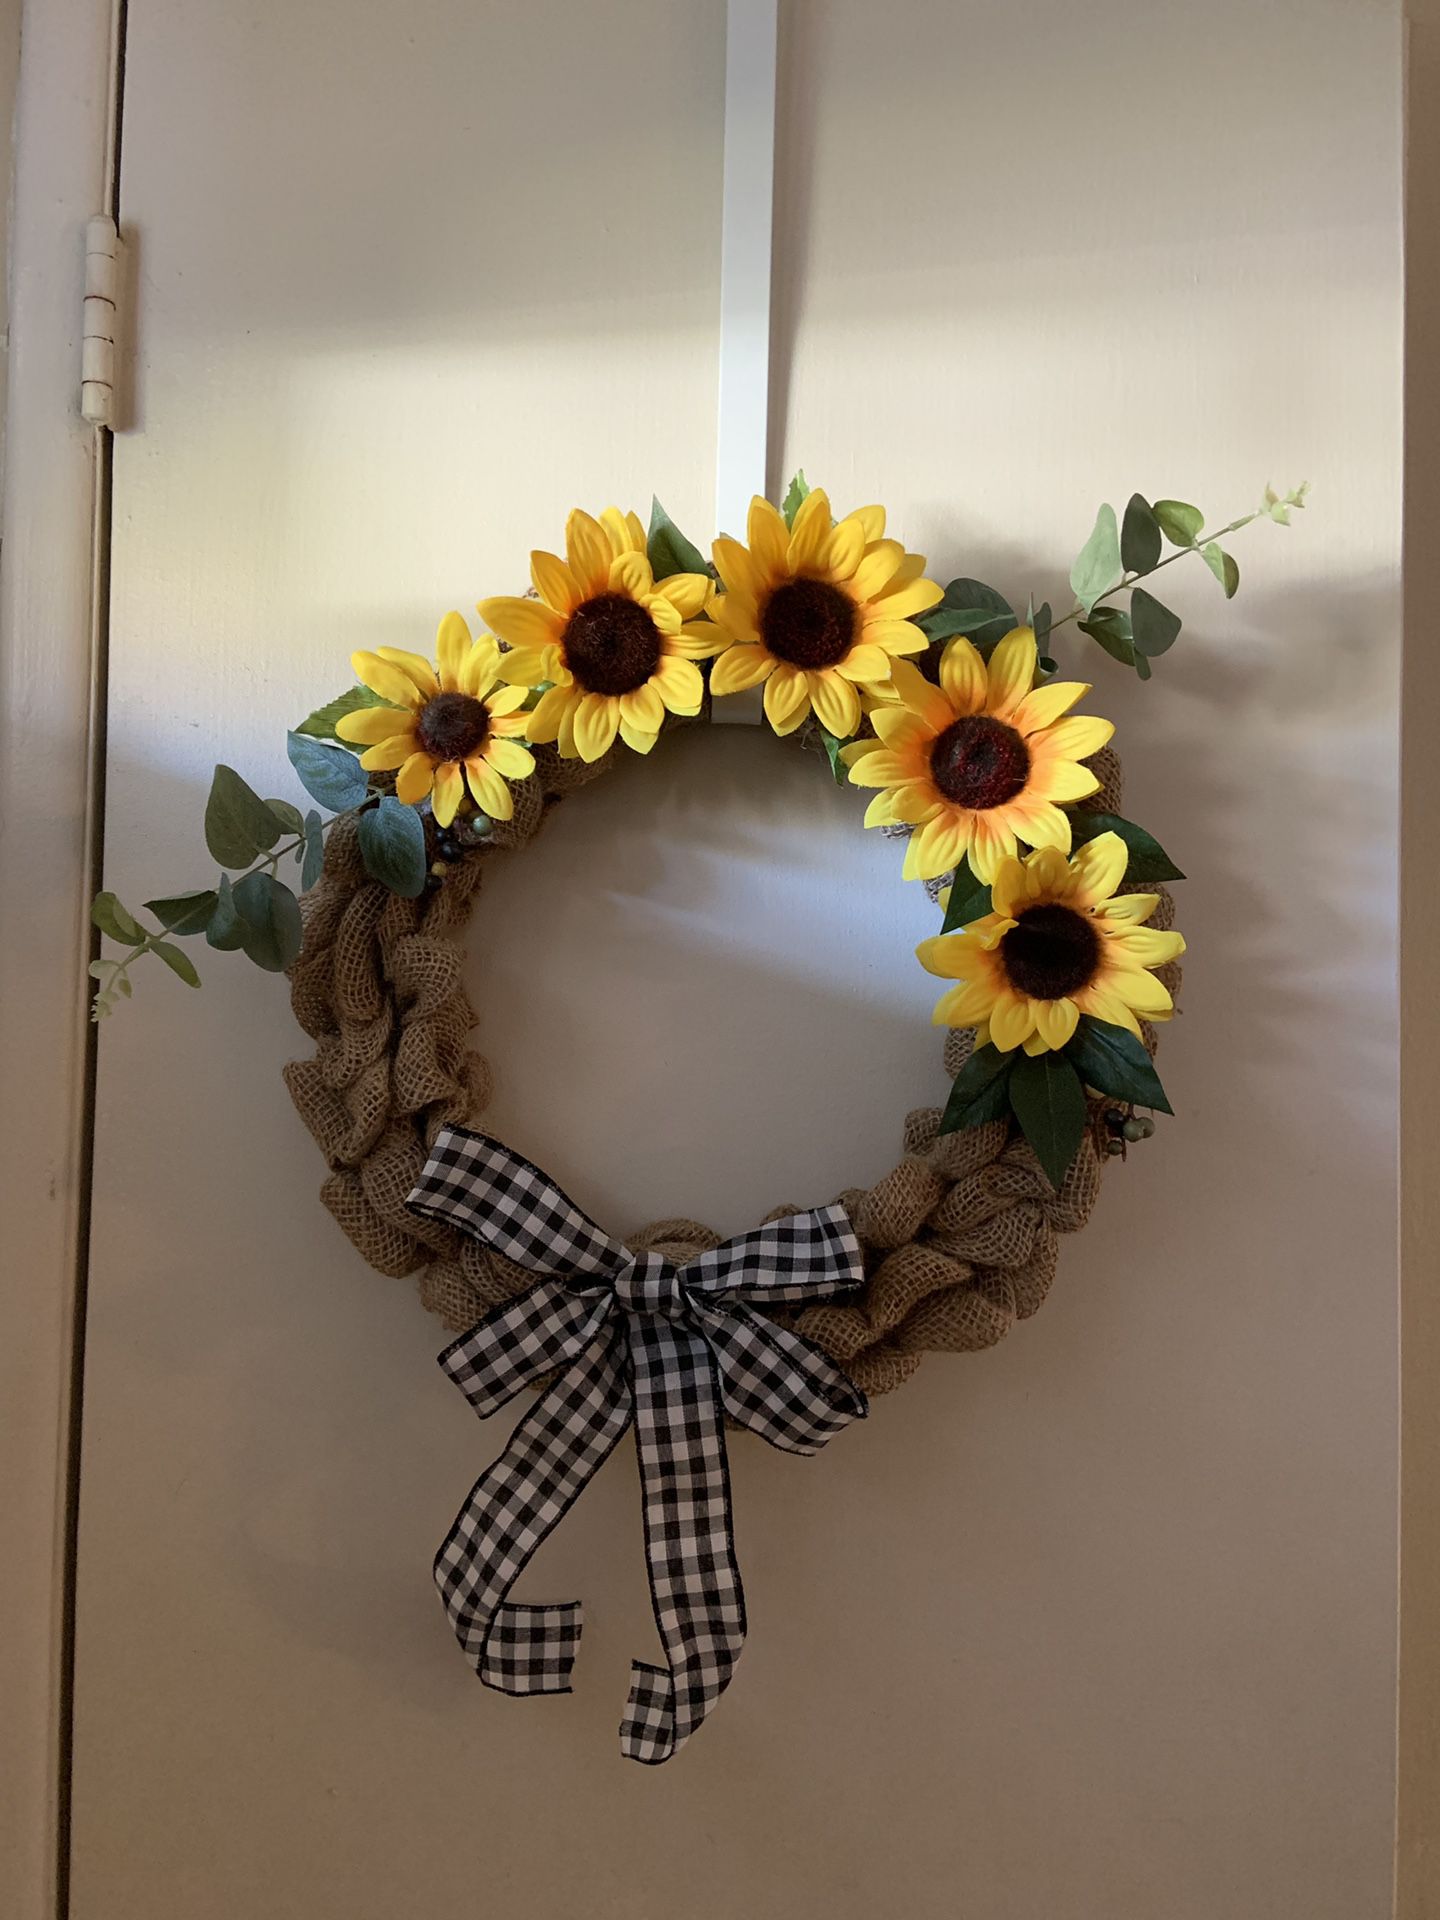 Fall country burlap wreath with sunflowers